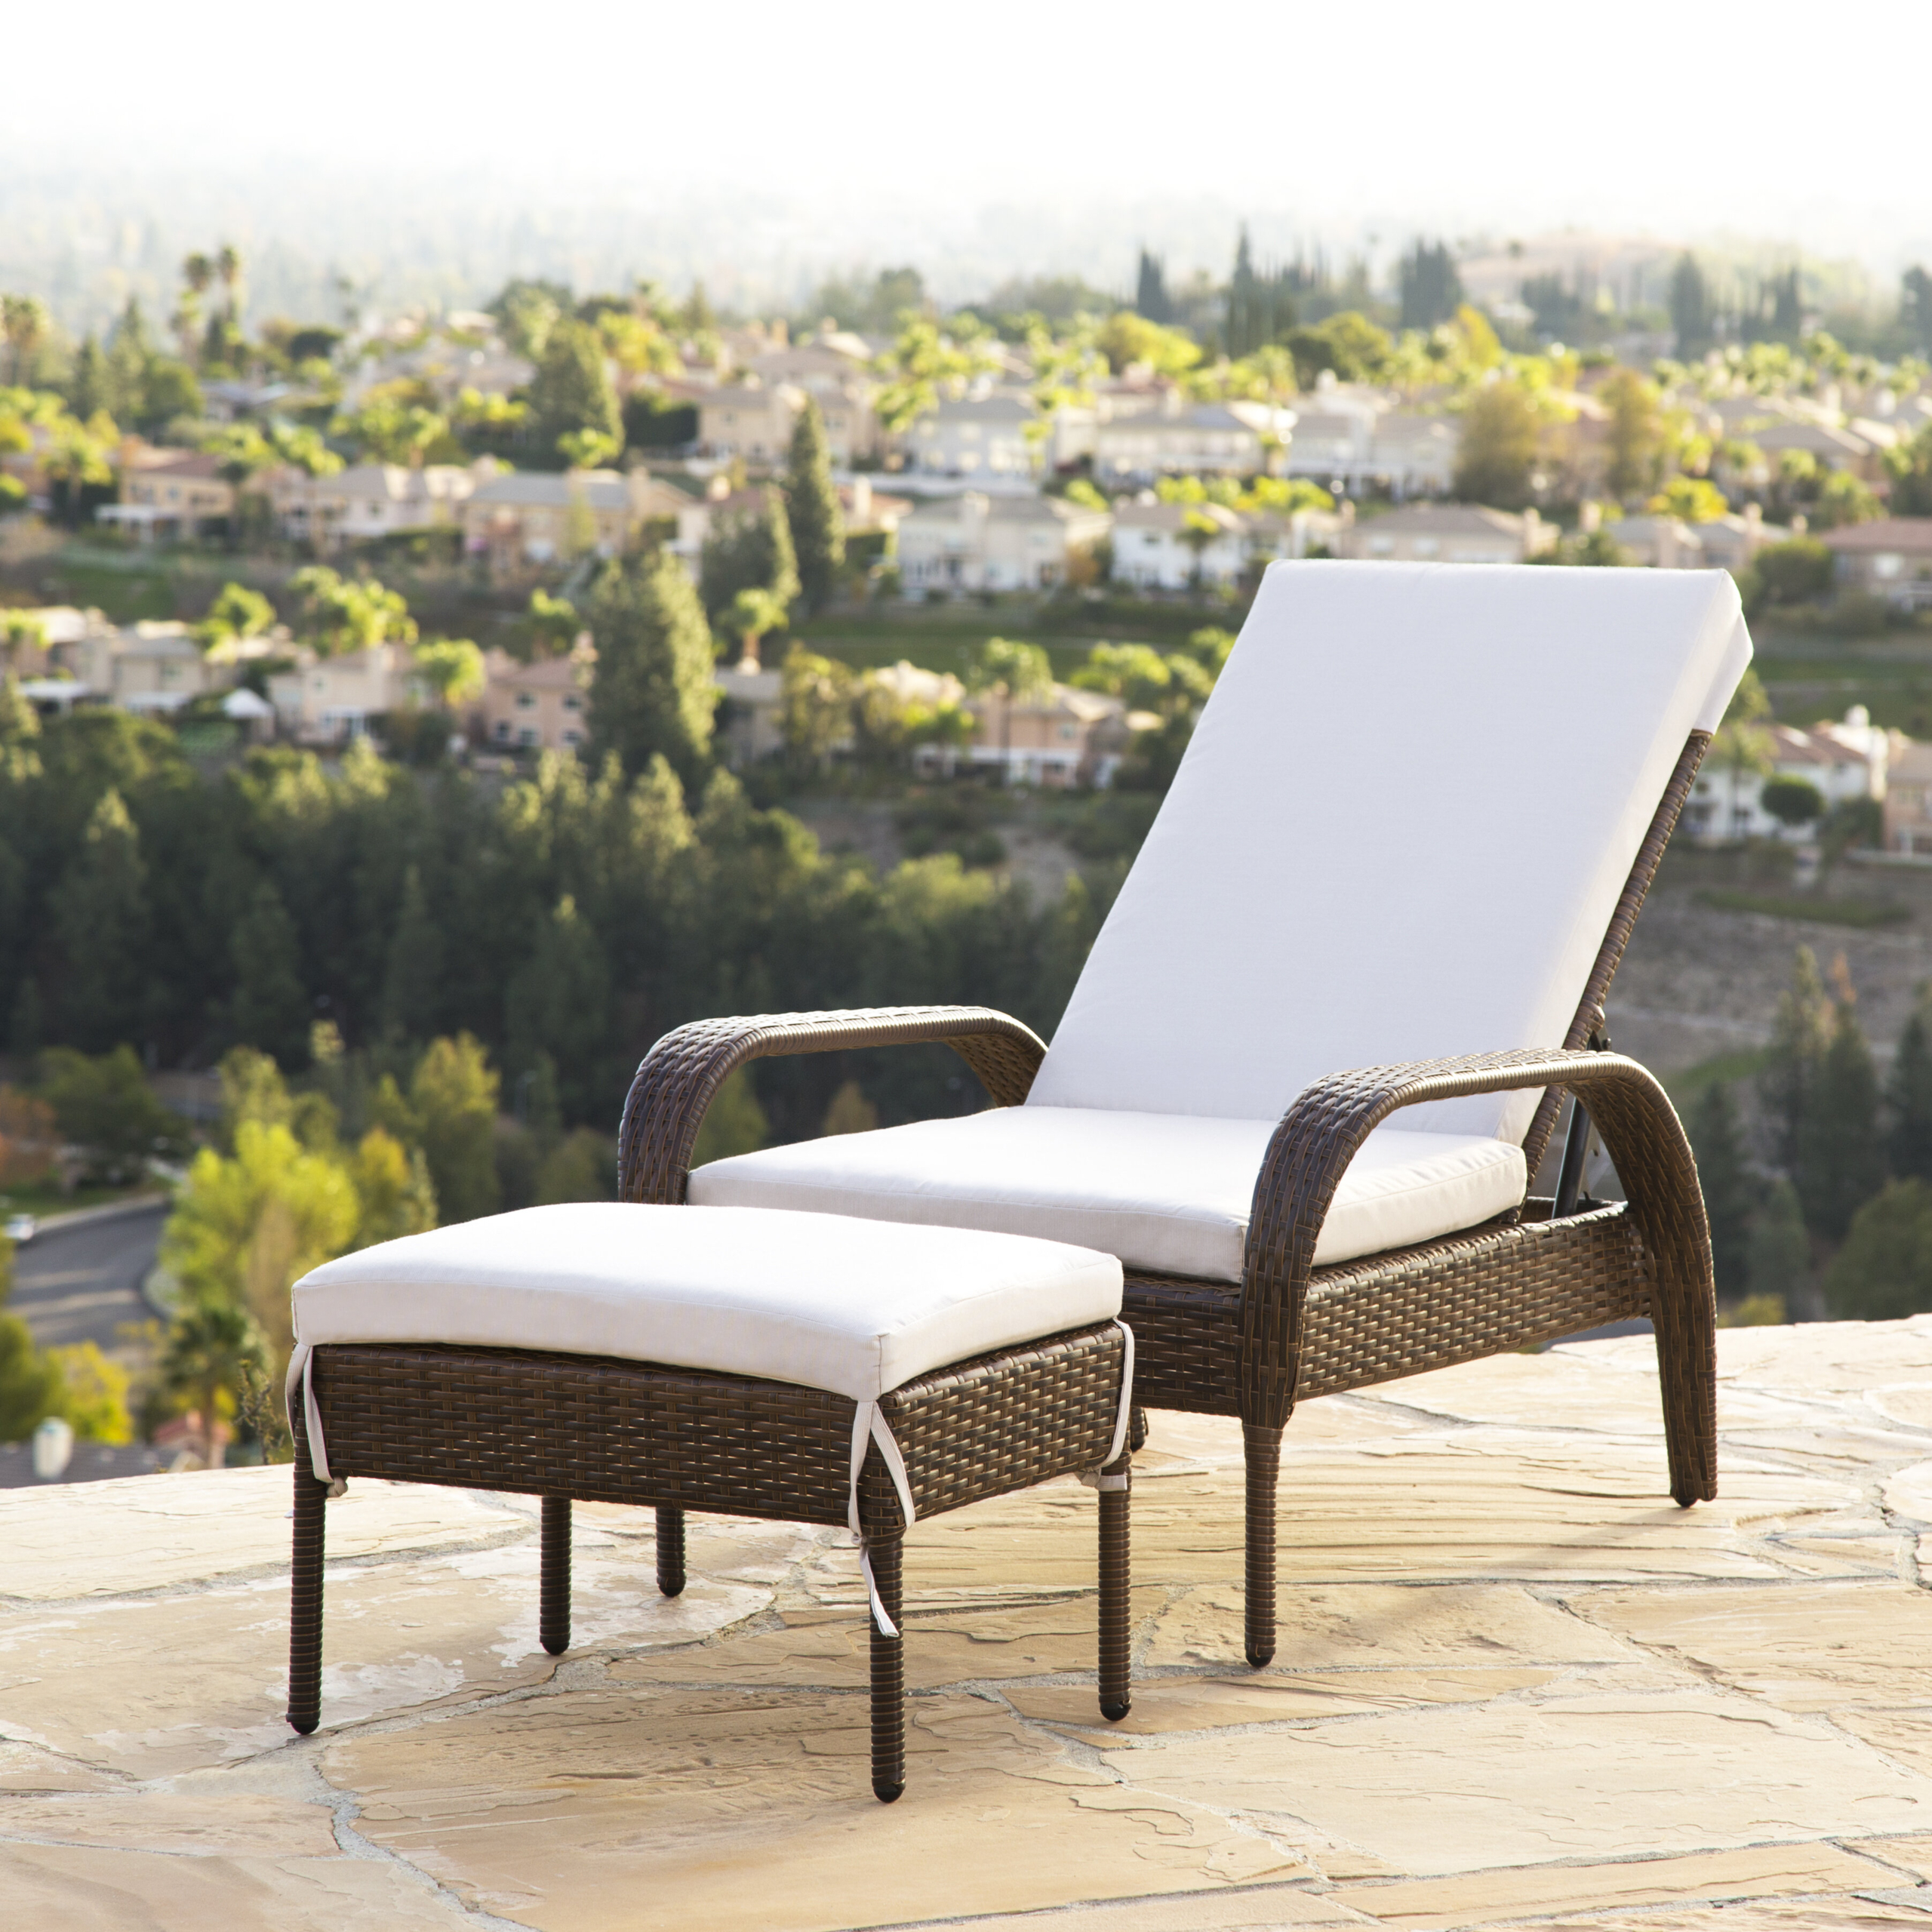 Outdoor Chairs With Ottoman Visualhunt, Oversized Patio Chairs With Ottoman Storage